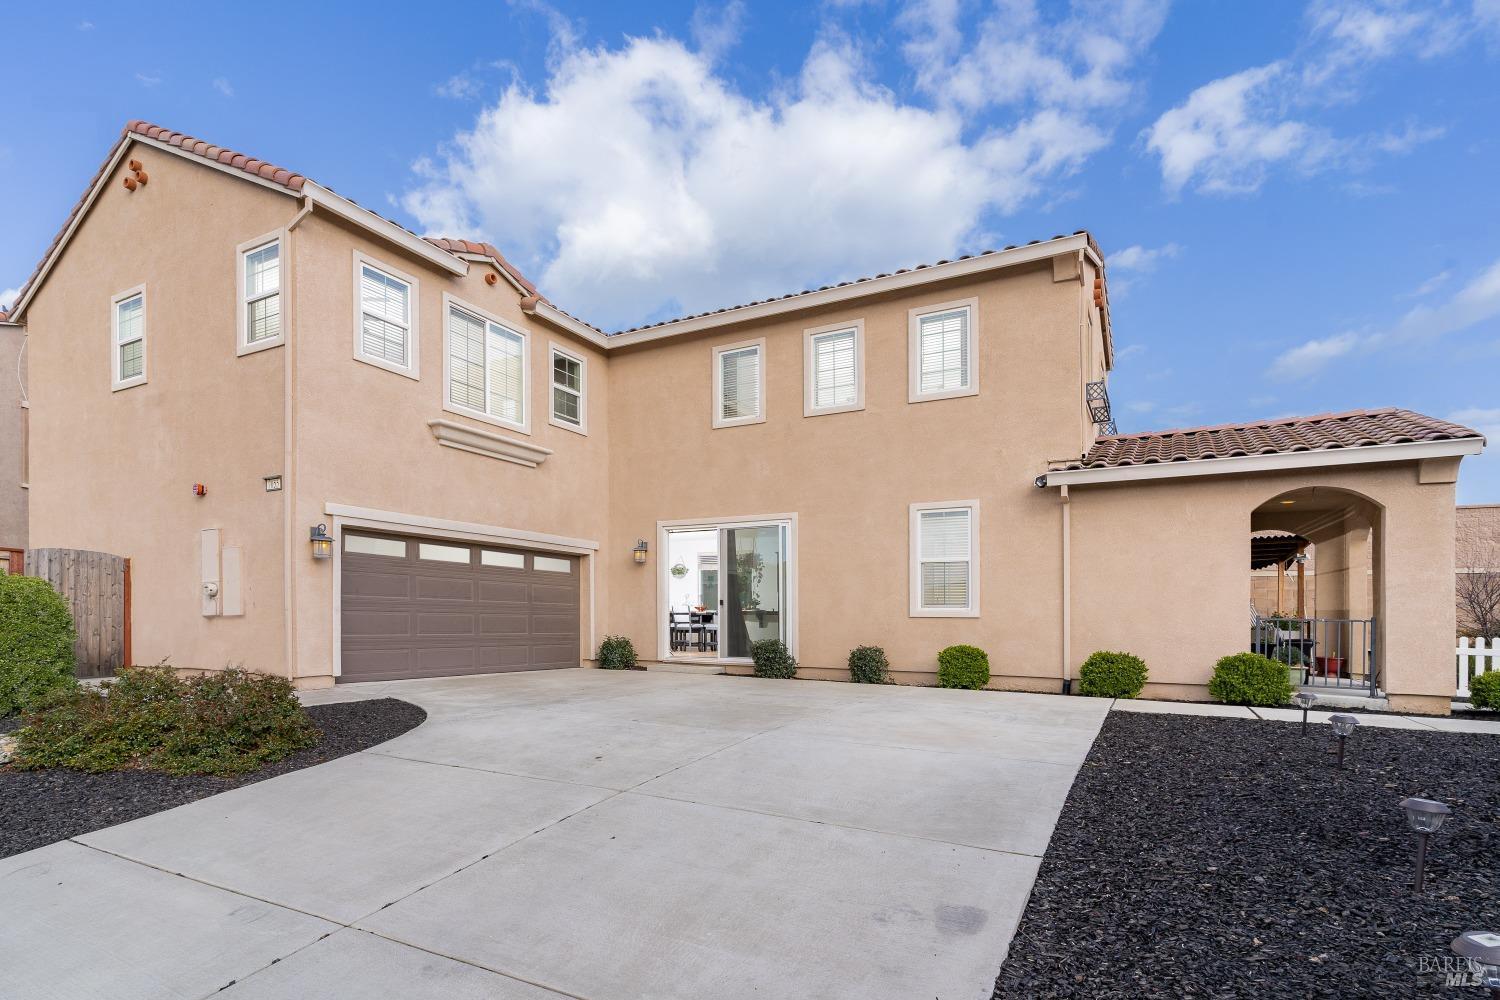 Photo of 7055 Sitka Ct in Vacaville, CA